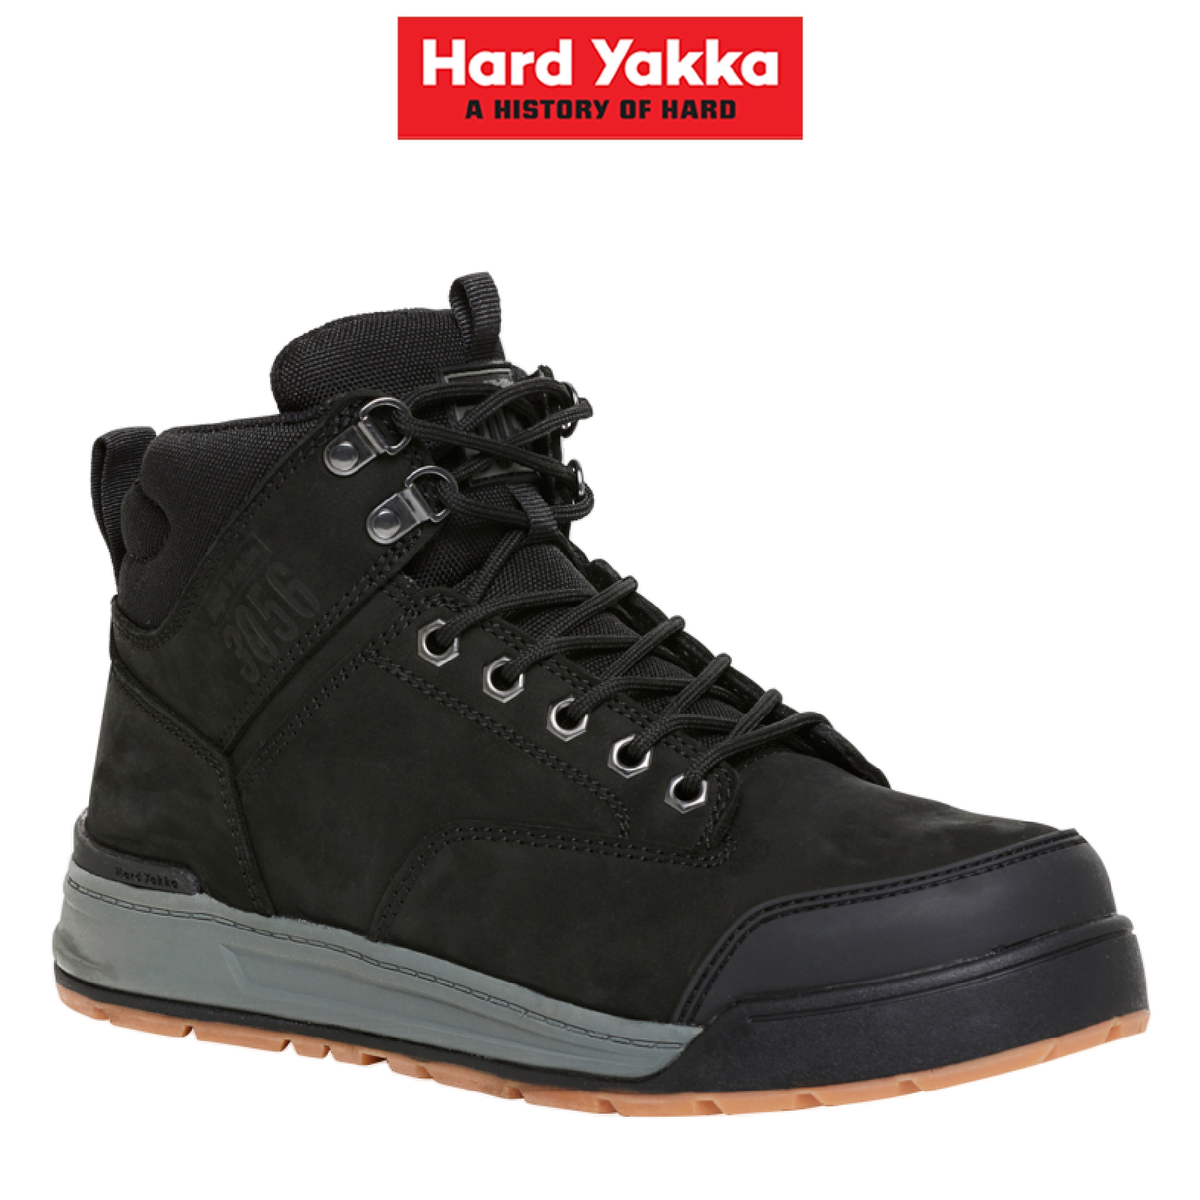 Hard Yakka 3056 Lace Zip Leather Work Safety Boots Memory Form Protect Y60201